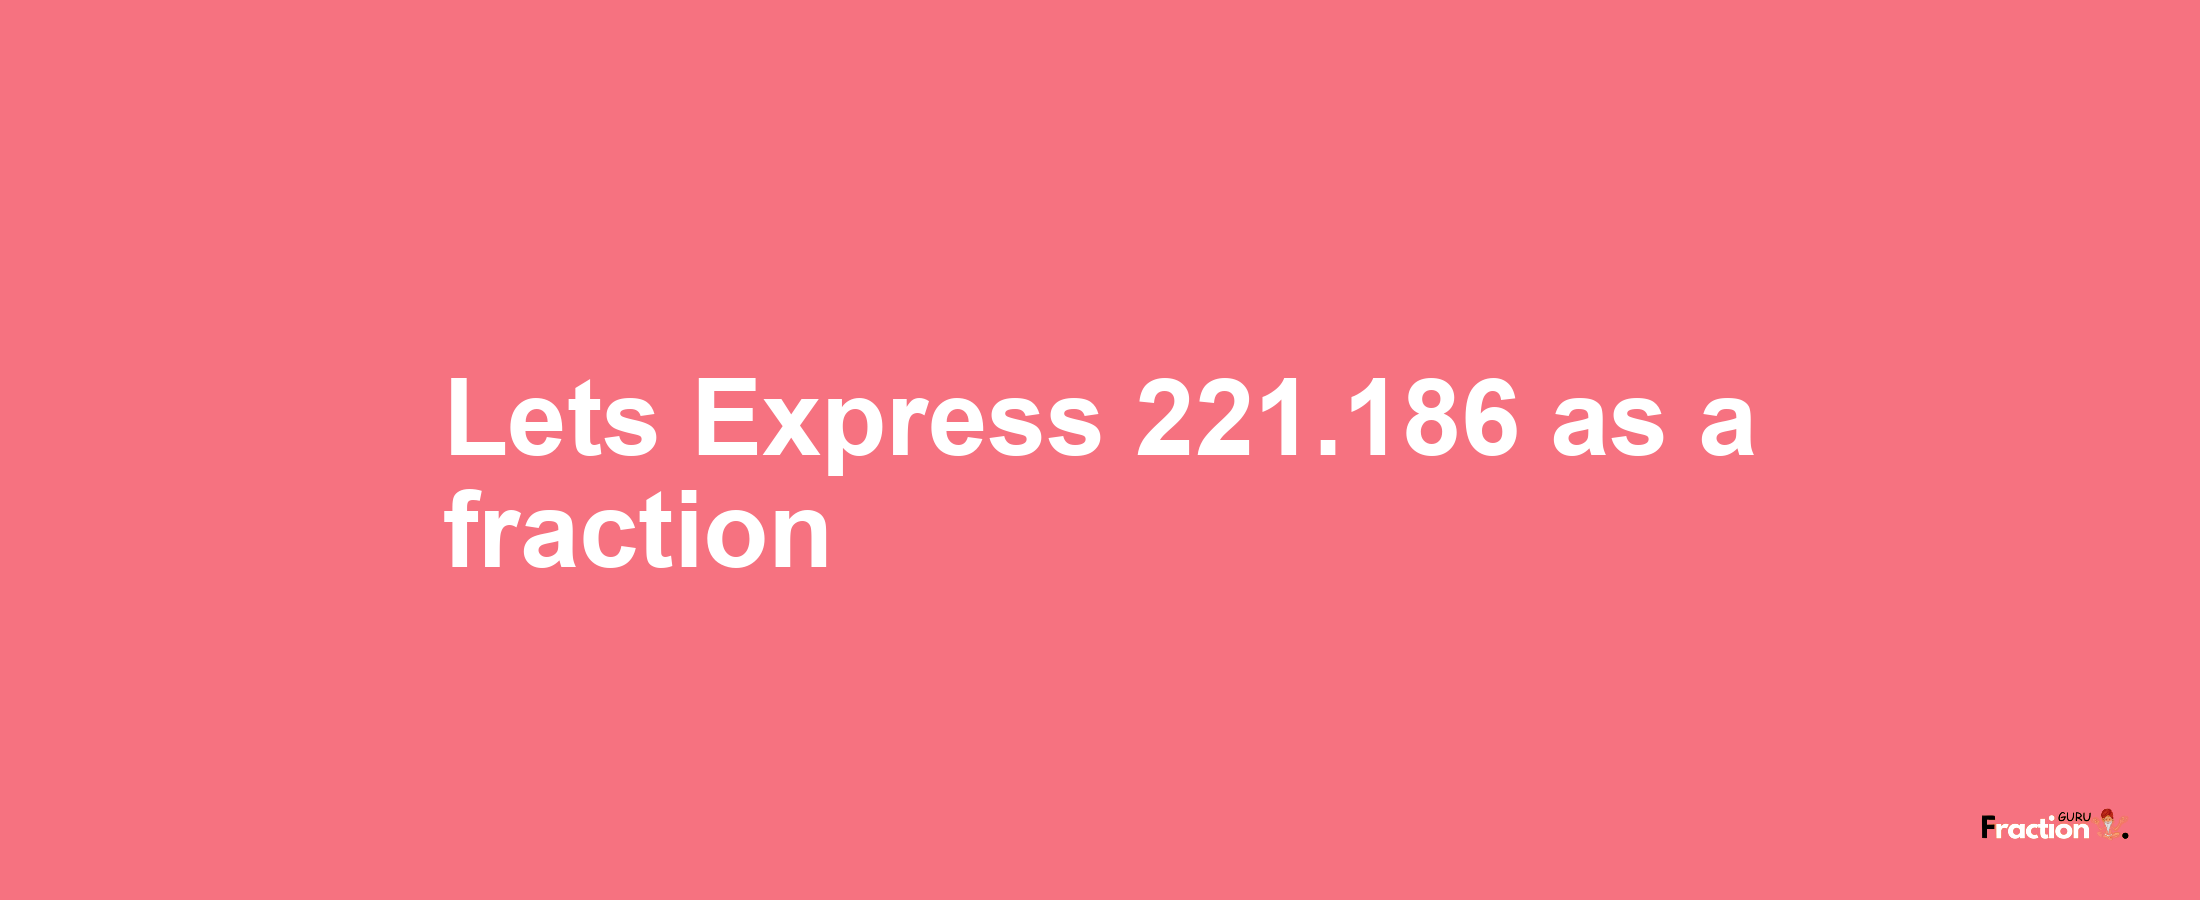 Lets Express 221.186 as afraction